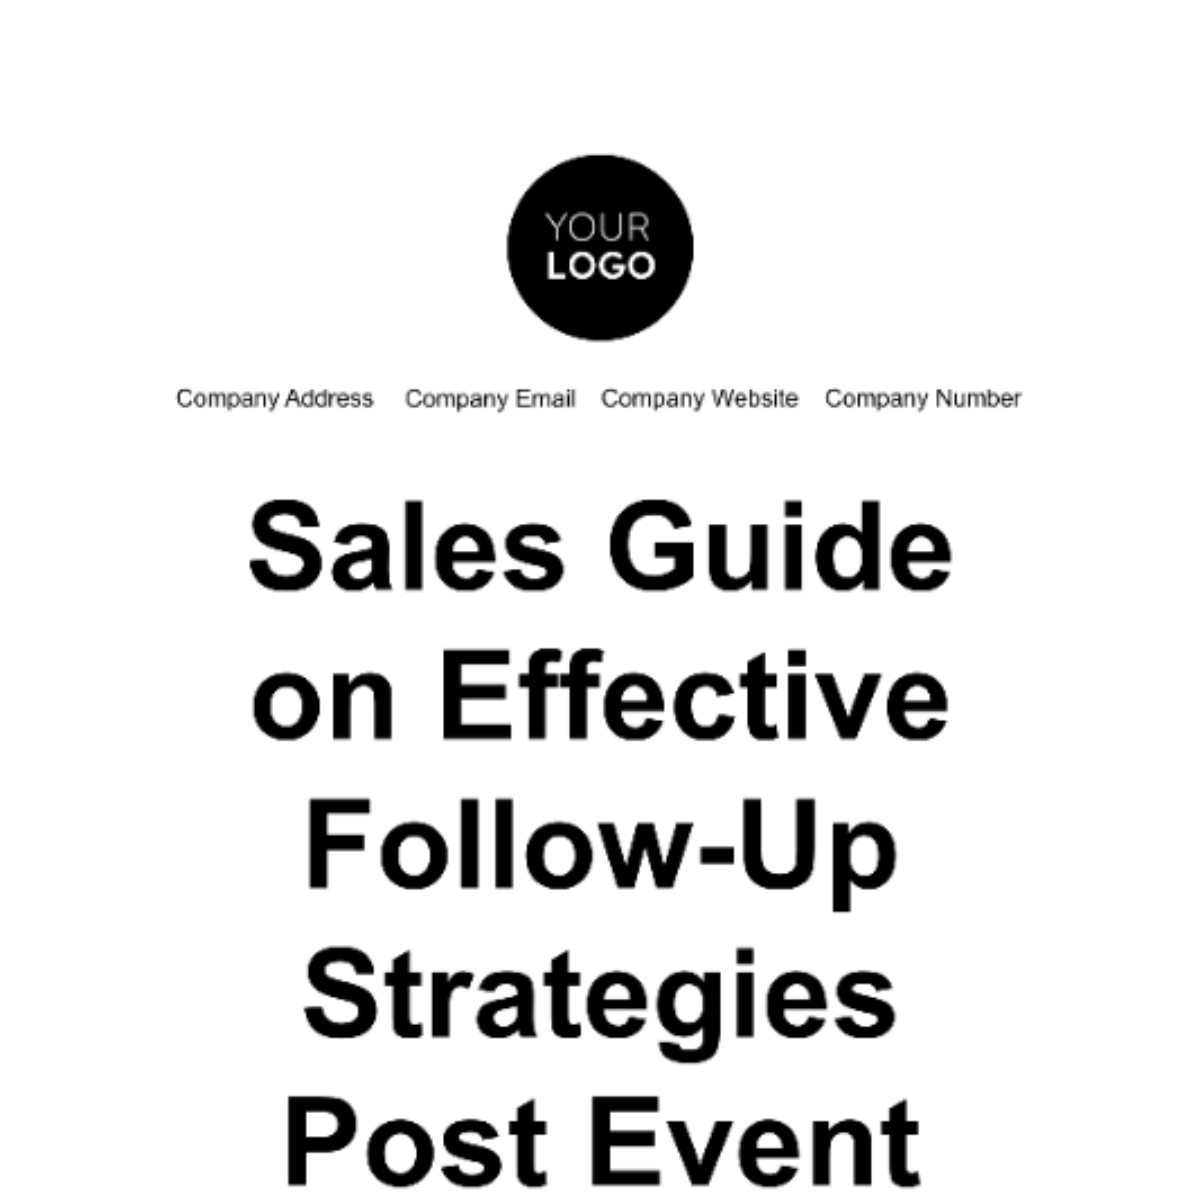 Sales Guide on Effective Follow-Up Strategies Post Event Template